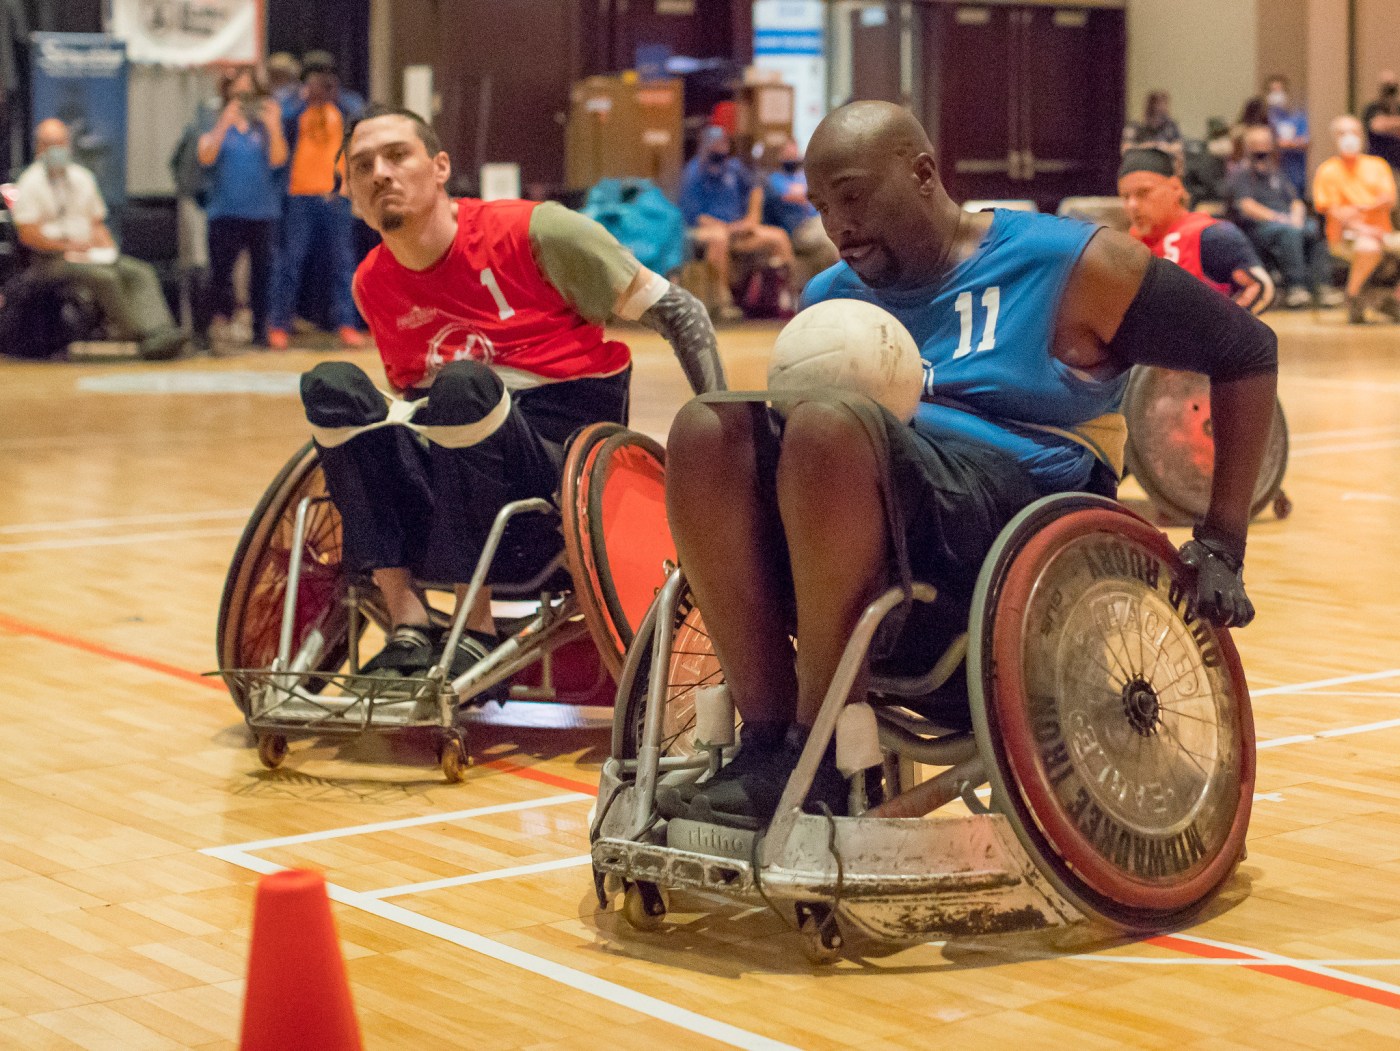 40th National Veterans Wheelchair Games: Army Veteran competes in wheelchair rugby for first time in 15 years